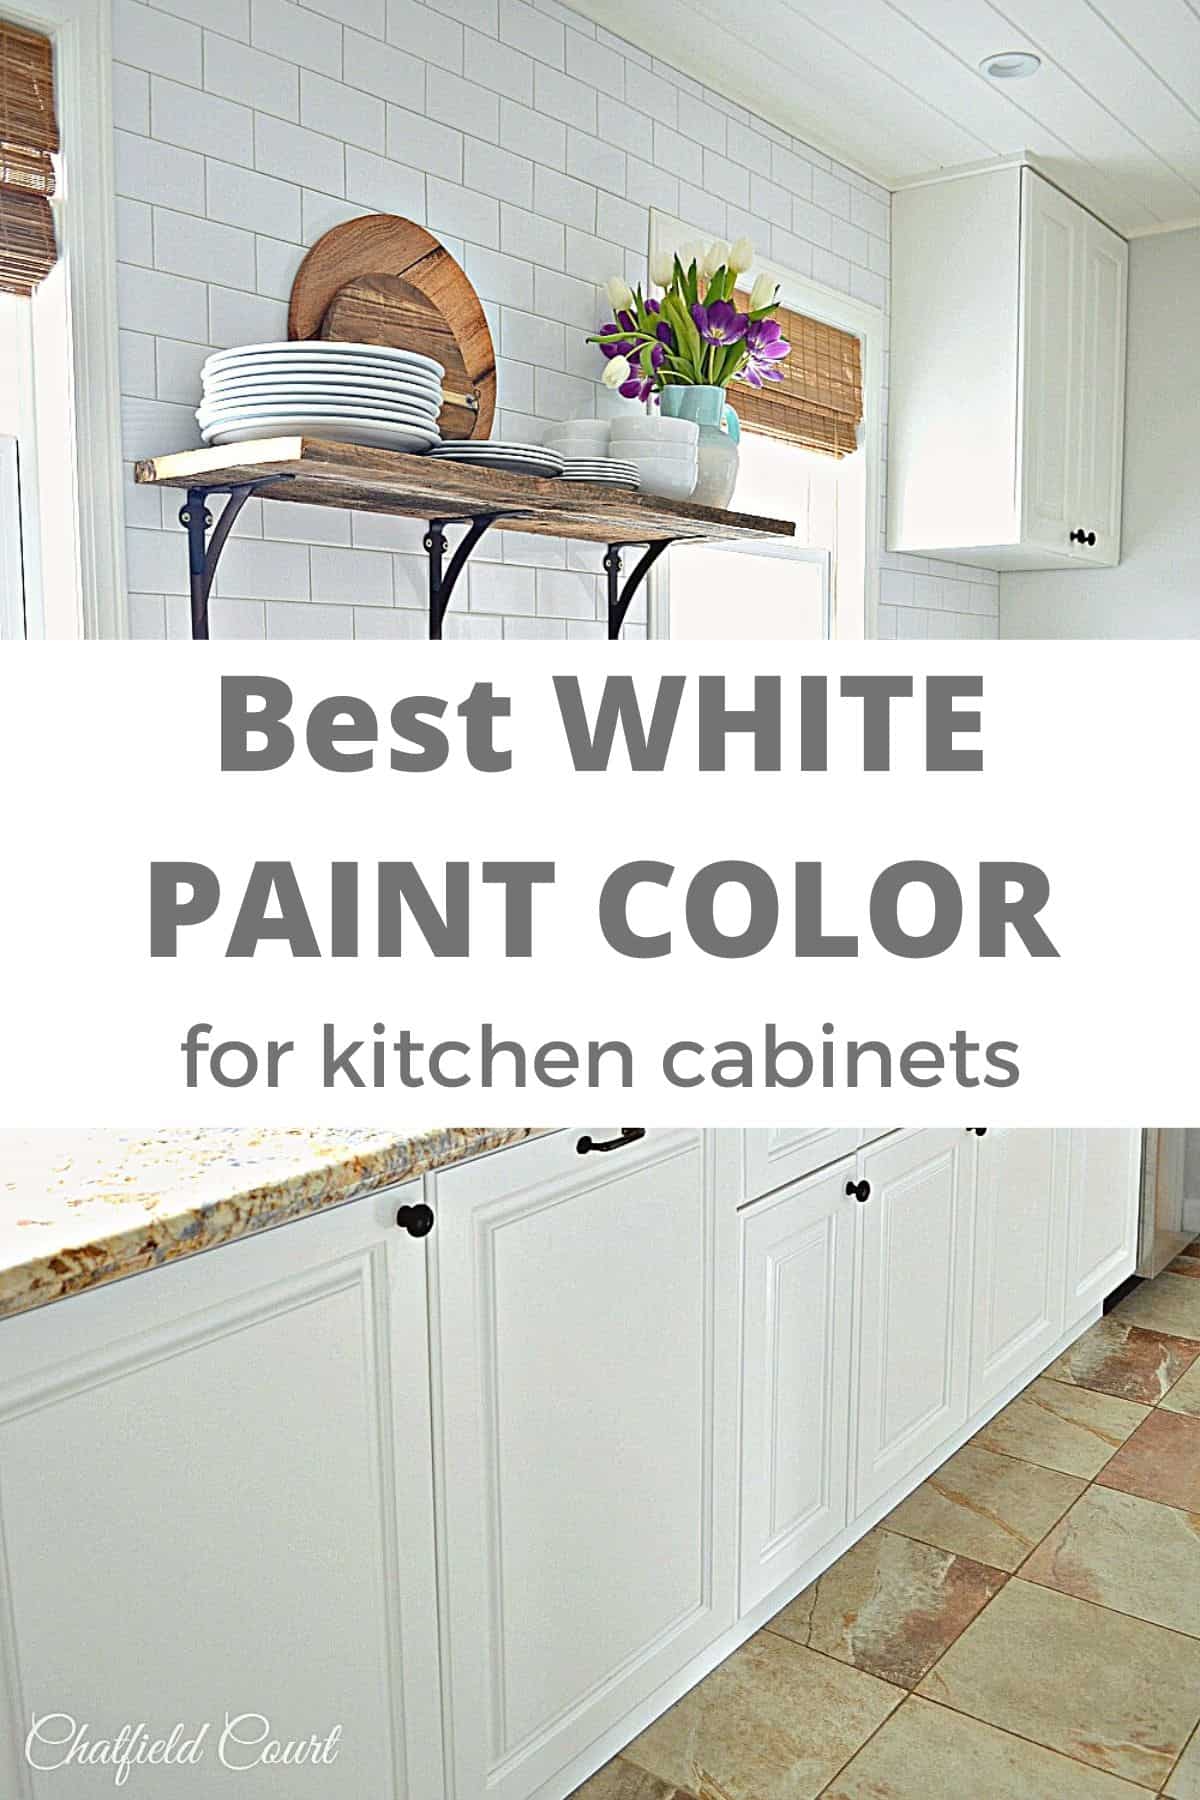 What is the Most Popular White Color for Kitchen Cabinets